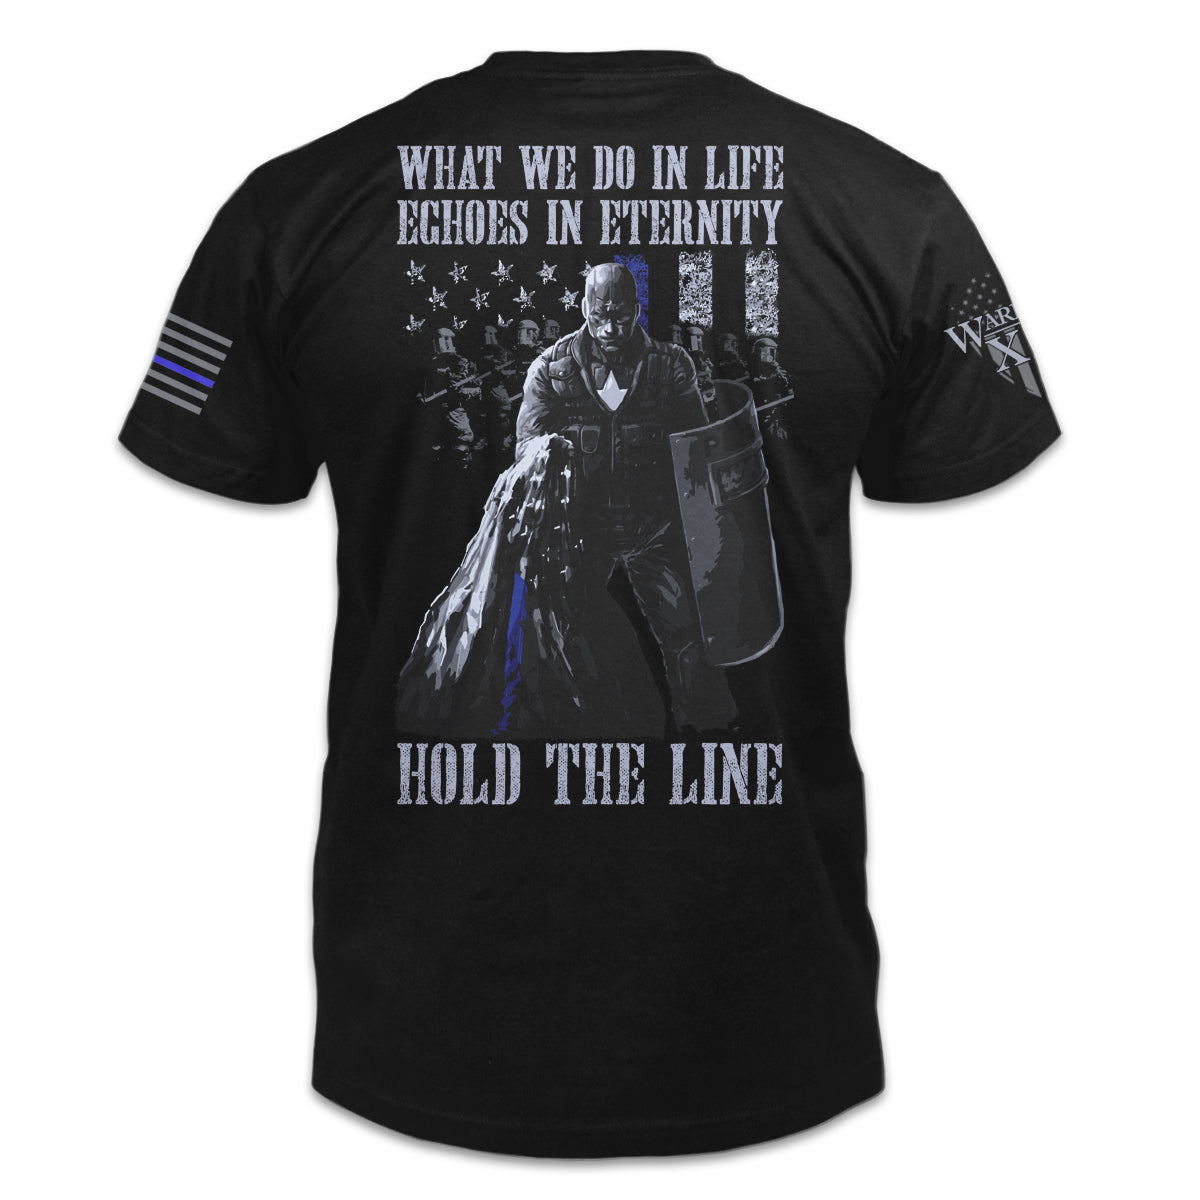 A black t-shirt with the words "What we do in life, echoes in eternity. Hold The Line" with a police officer in riot gear printed on the back of the shirt.